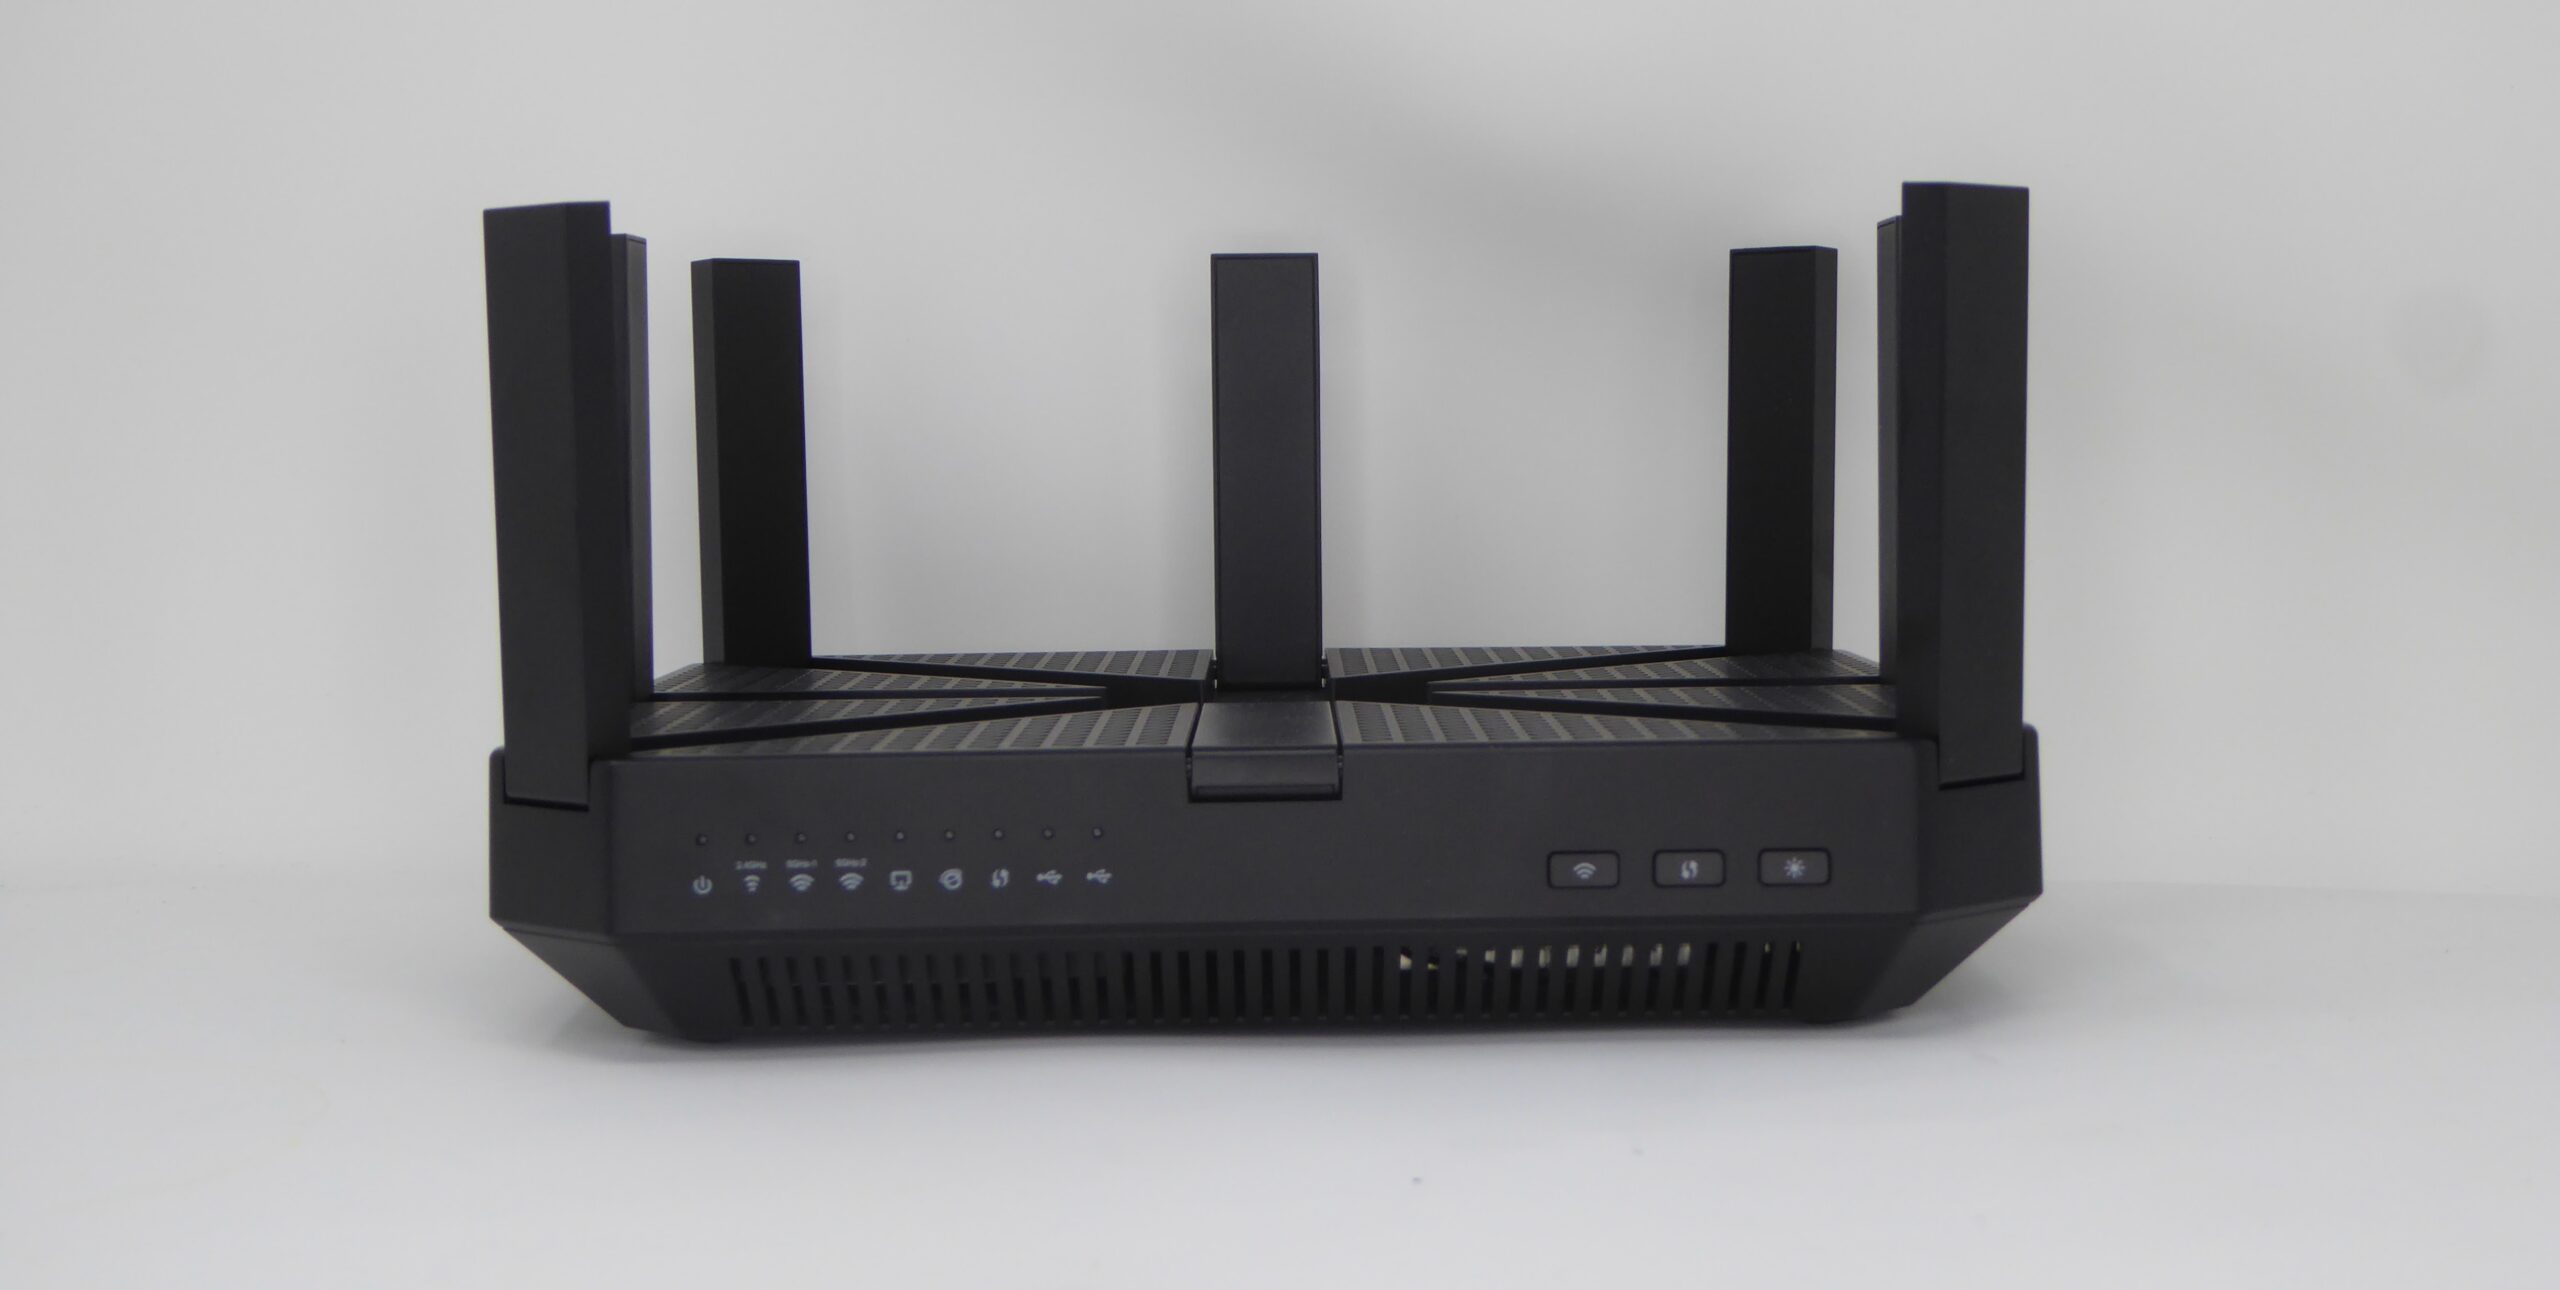 Router scaled